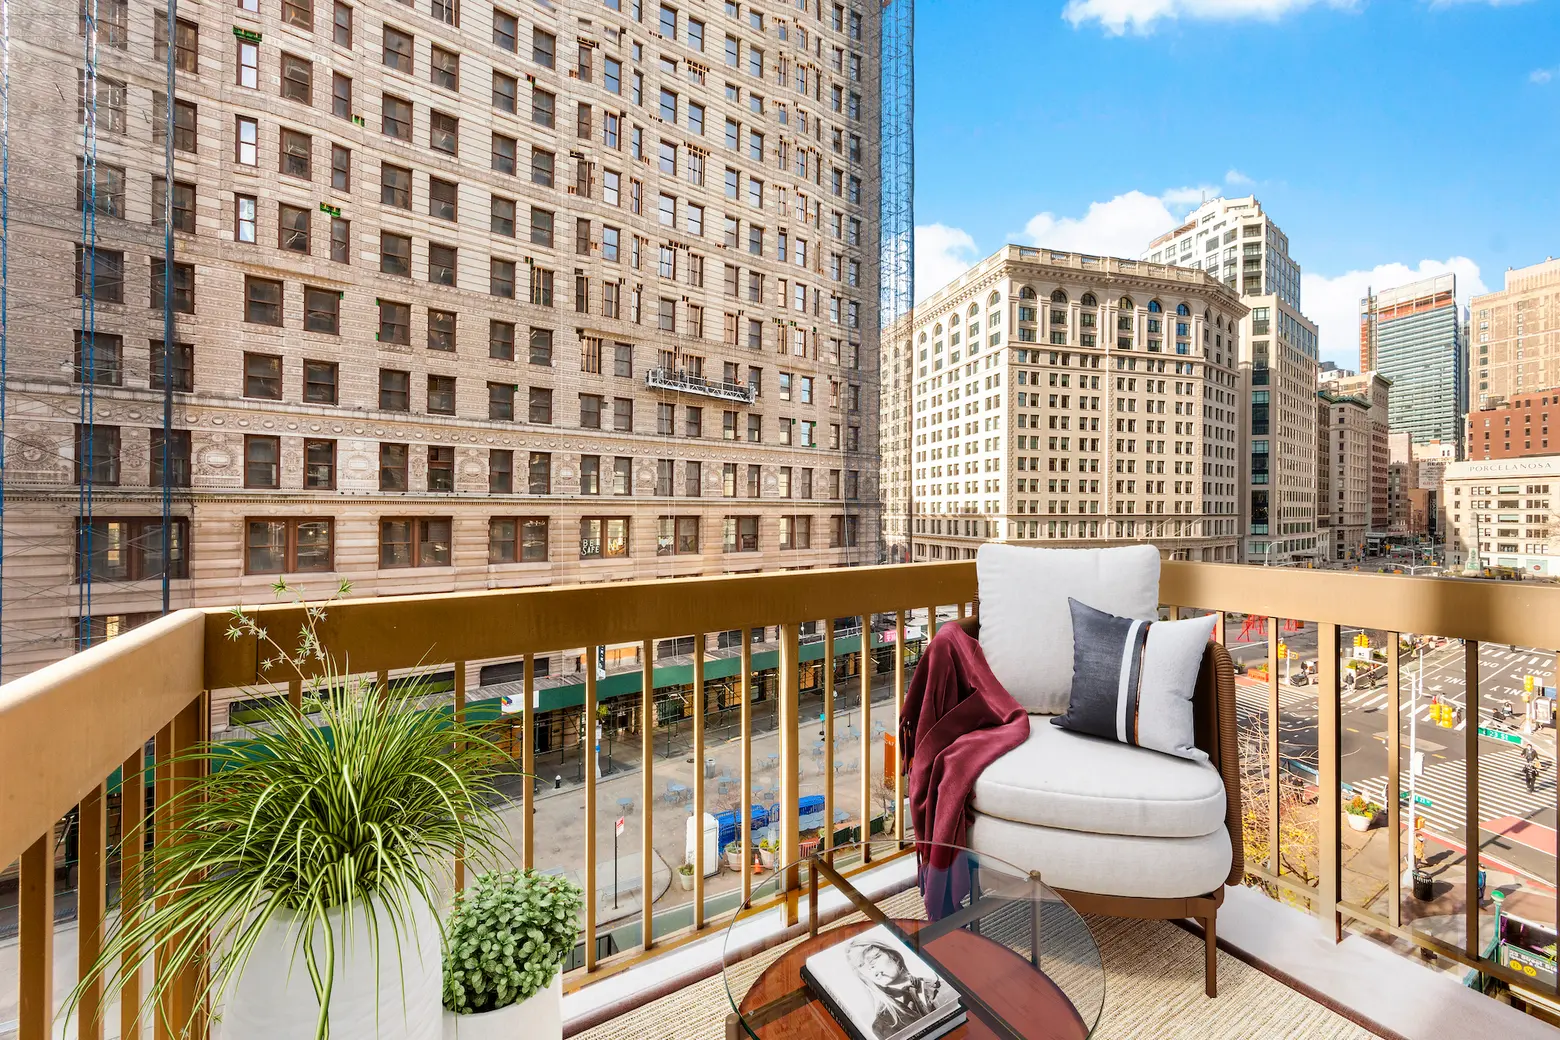 $3,650/month one-bedroom has a balcony overlooking the Flatiron Building